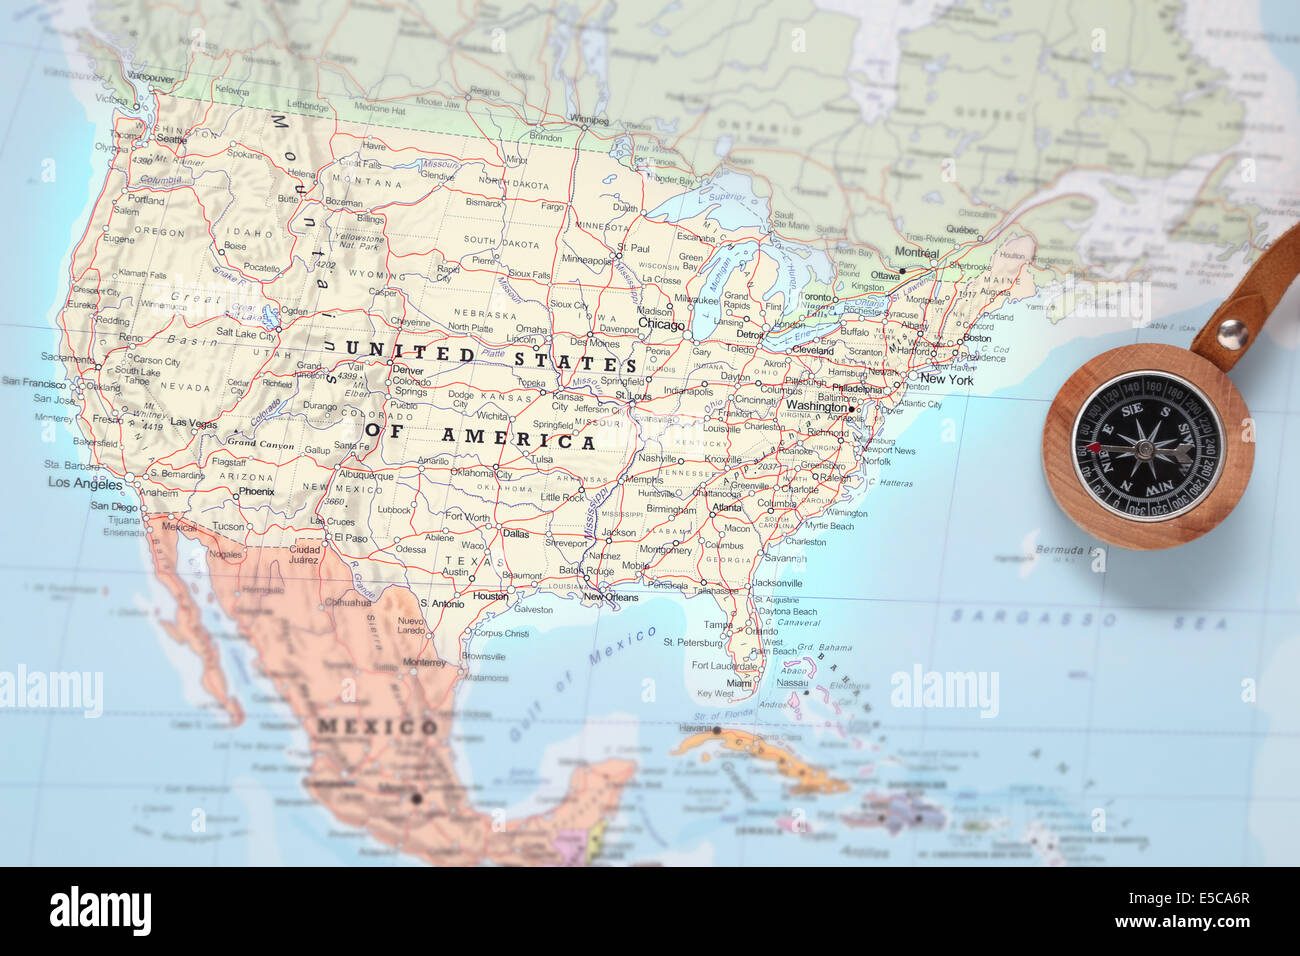 Compass on a map pointing at United States and planning a travel destination Stock Photo